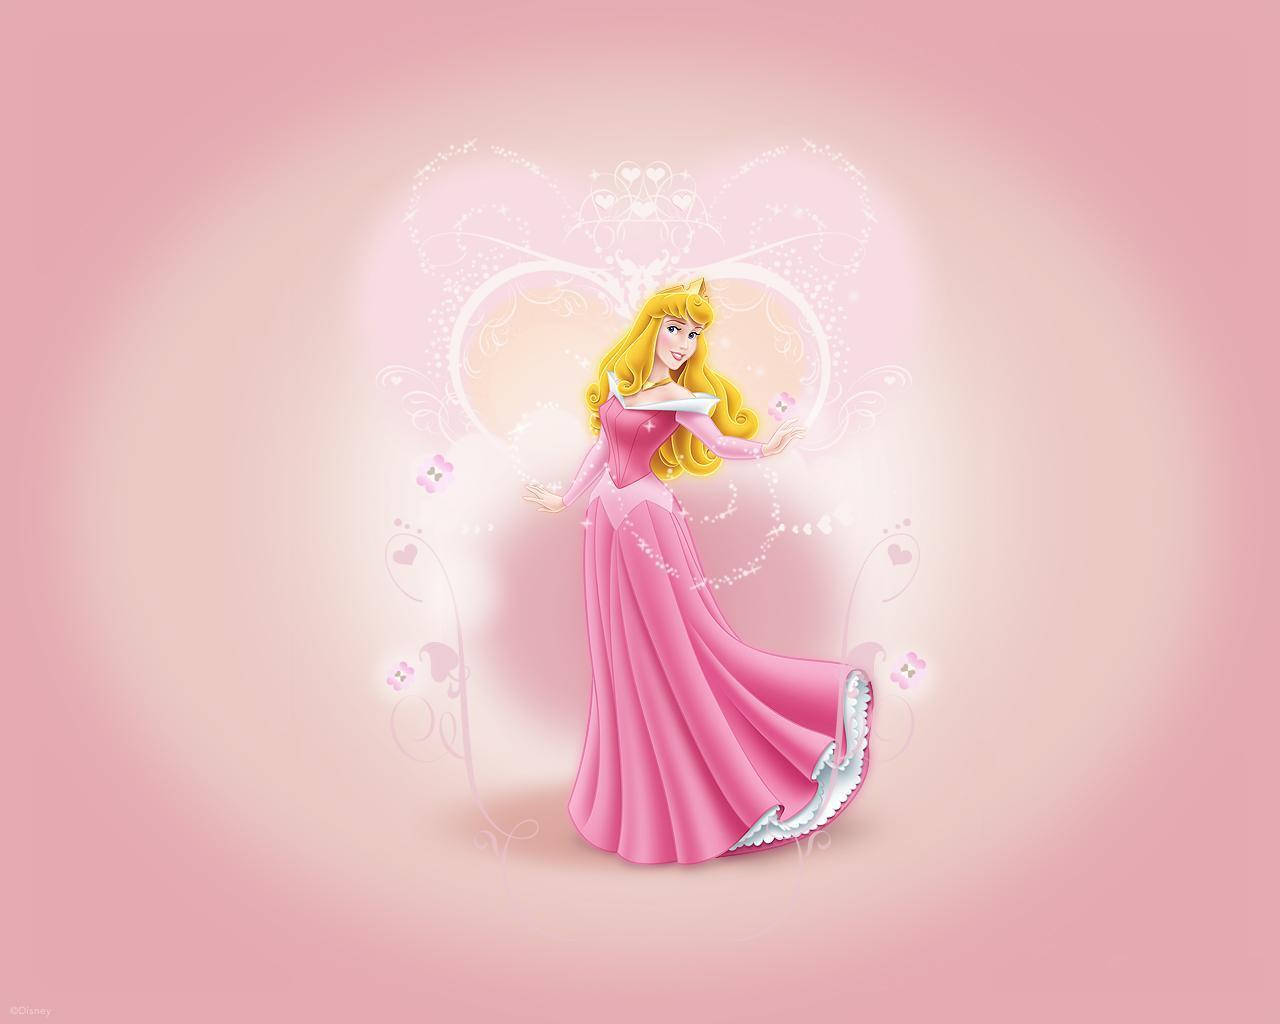 Experience the magic of a classic Disney Princess with a modern twist. Wallpaper